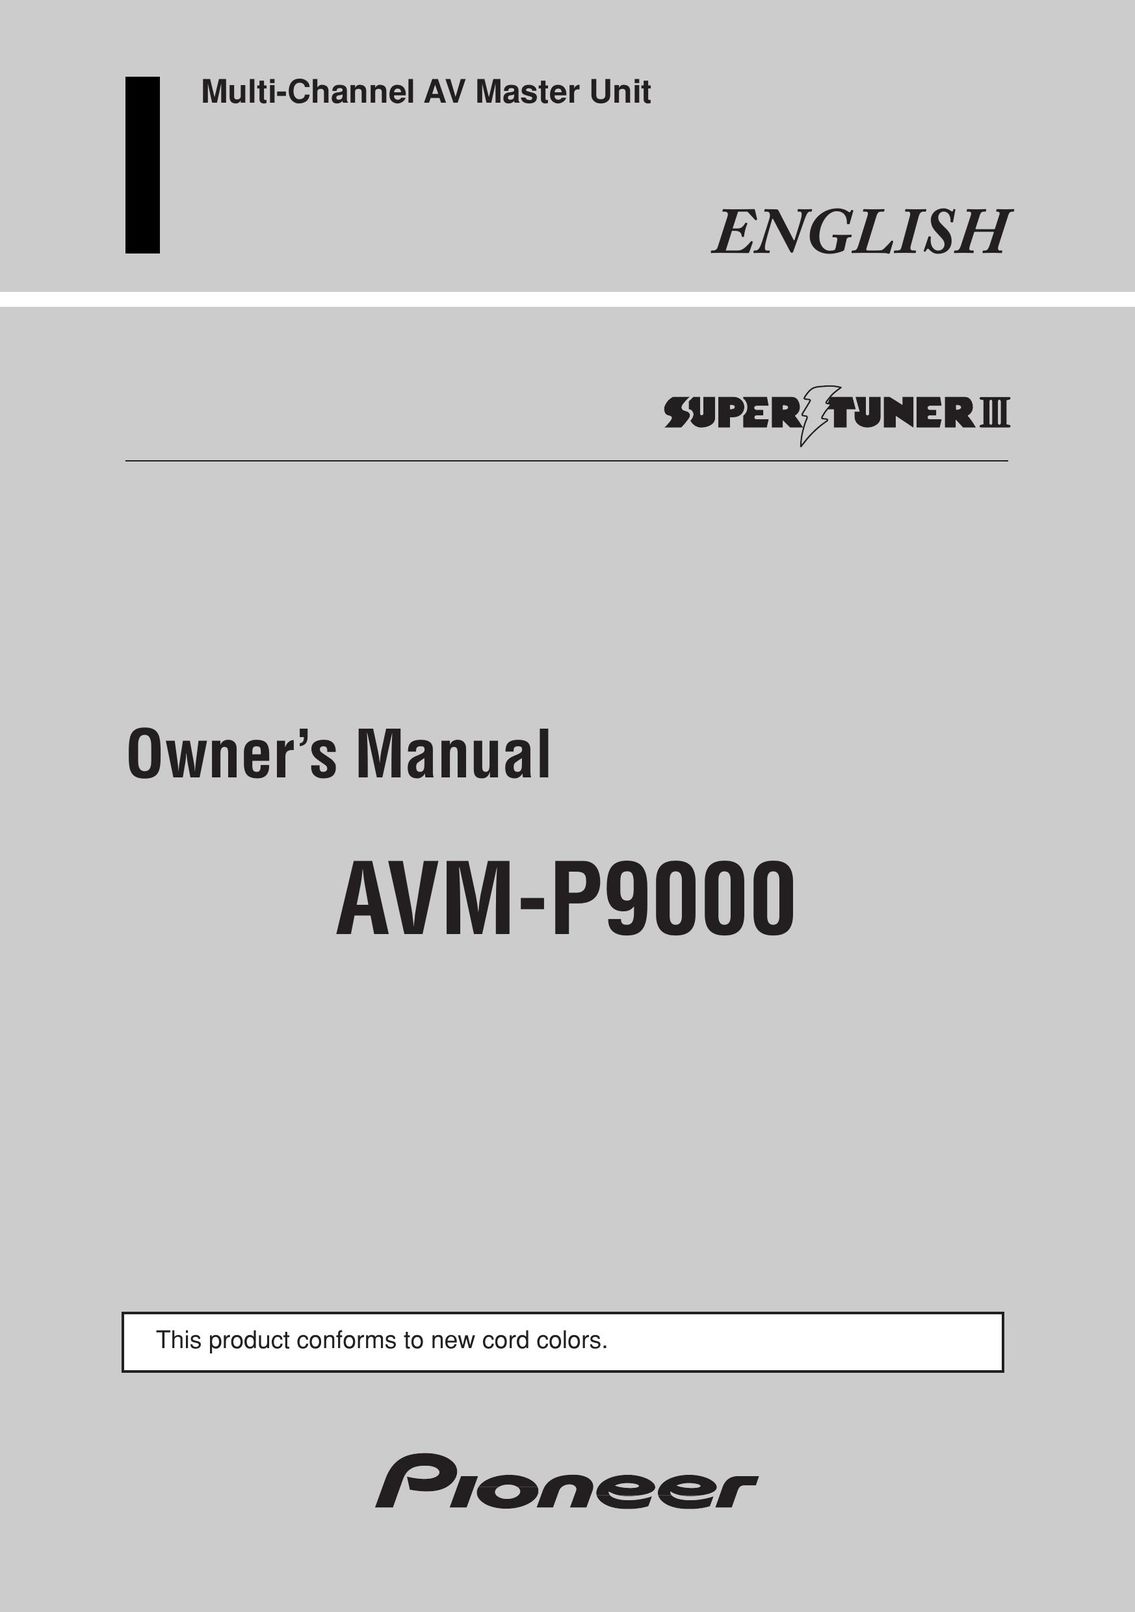 Pioneer AVM-P9000 Stereo Receiver User Manual